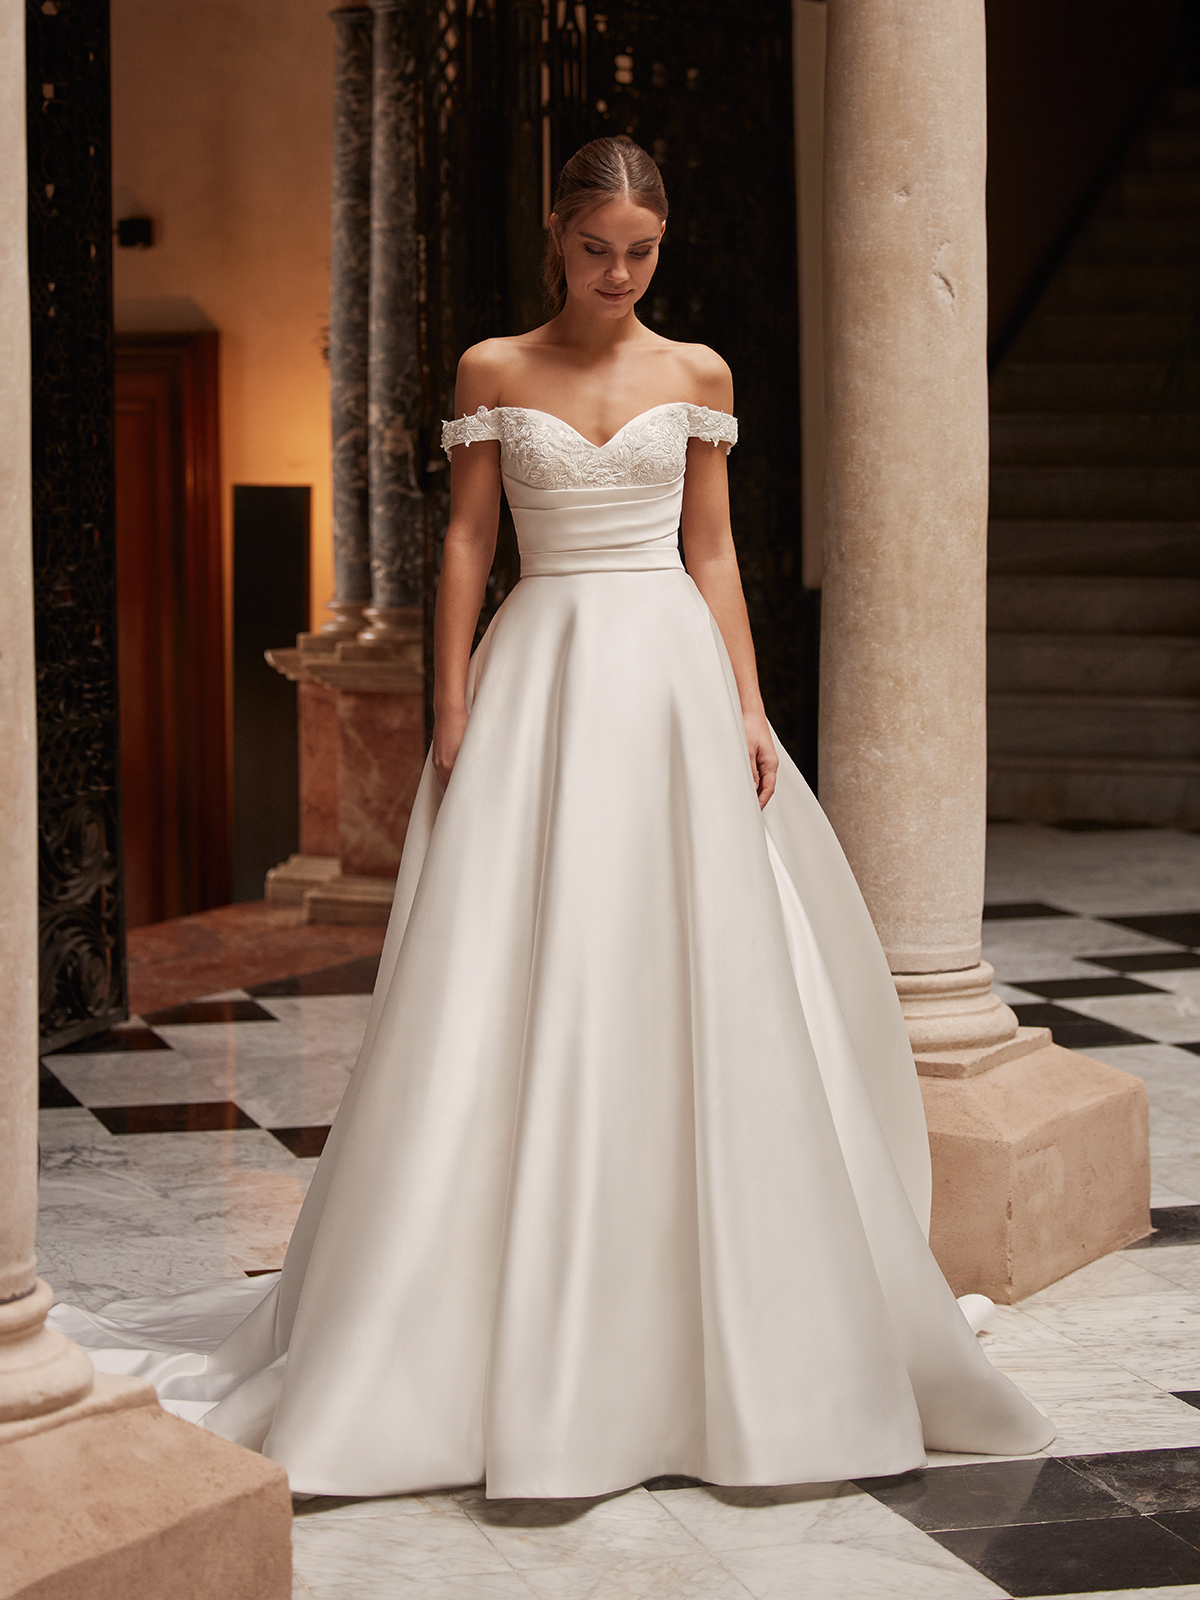 Woman wearing a classic stain ball gown wedding dress walking through a formal venue